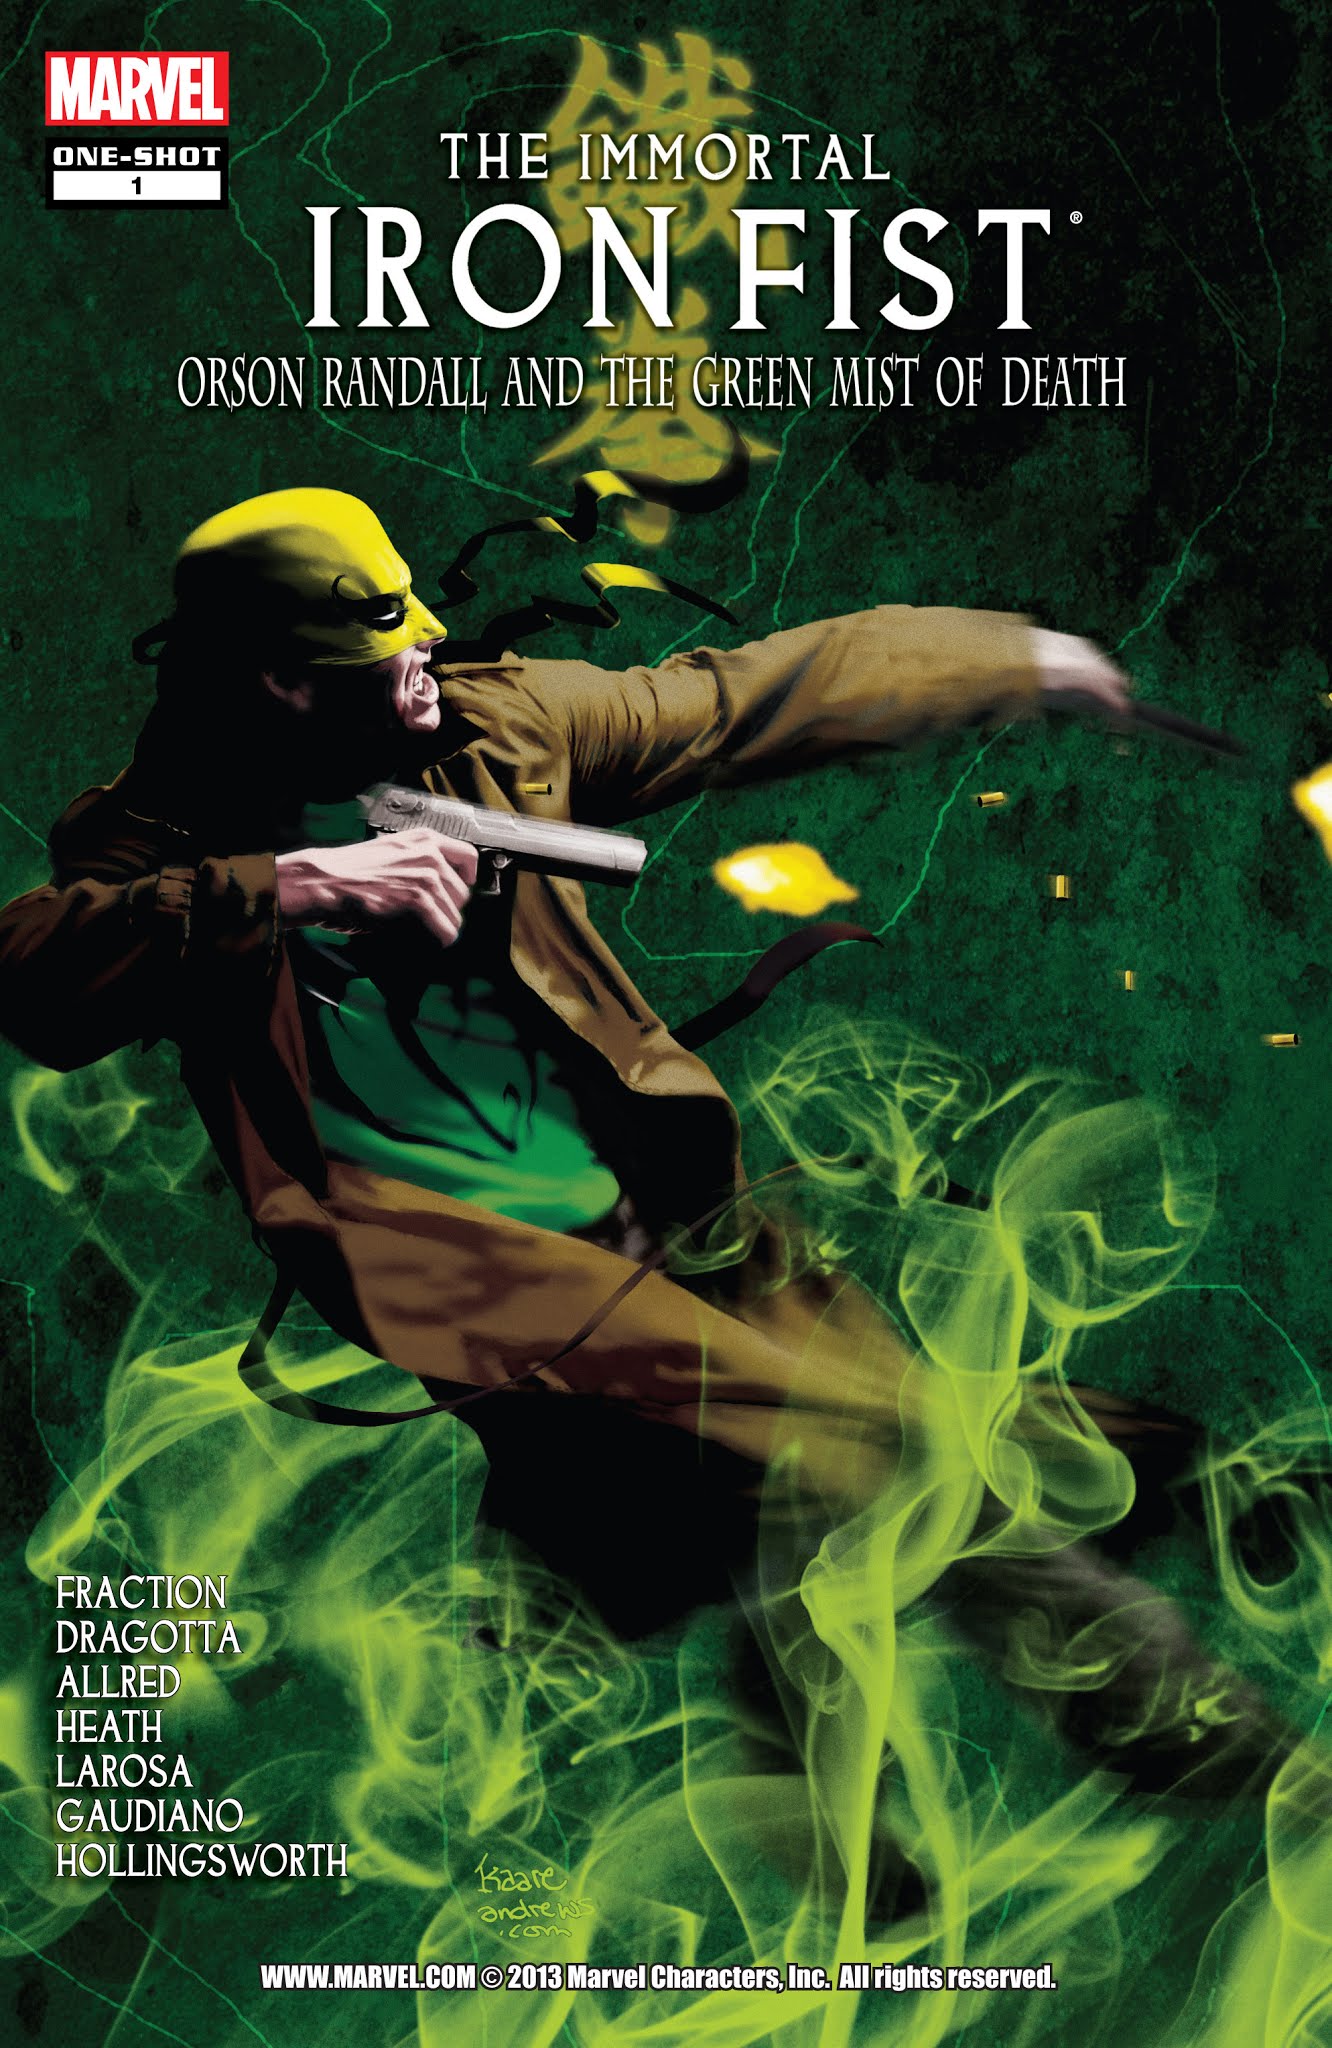 The Immortal Iron Fist: Orson Randall and The Green Mist of Death Full Page 1